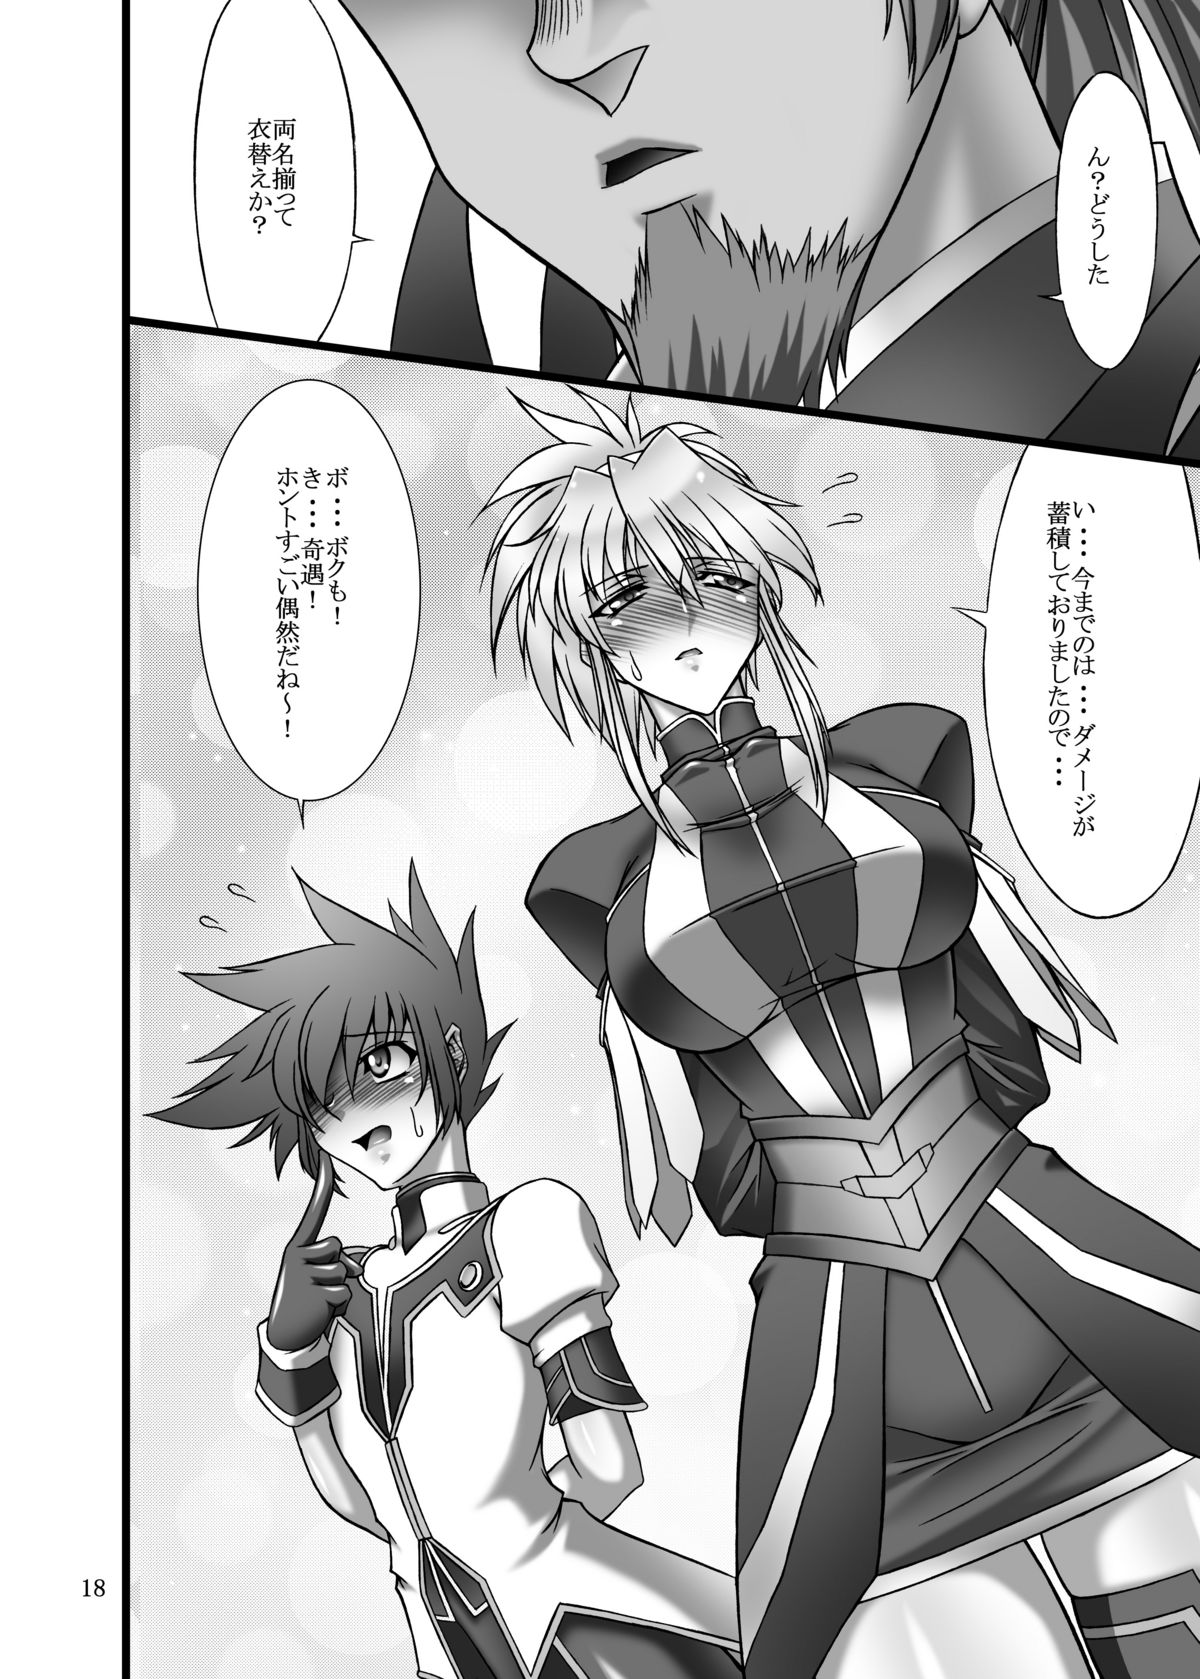 (C78) [Bobcaters (Hamon Ai, r13)] Kyoudou (Tales of the Abyss) page 18 full